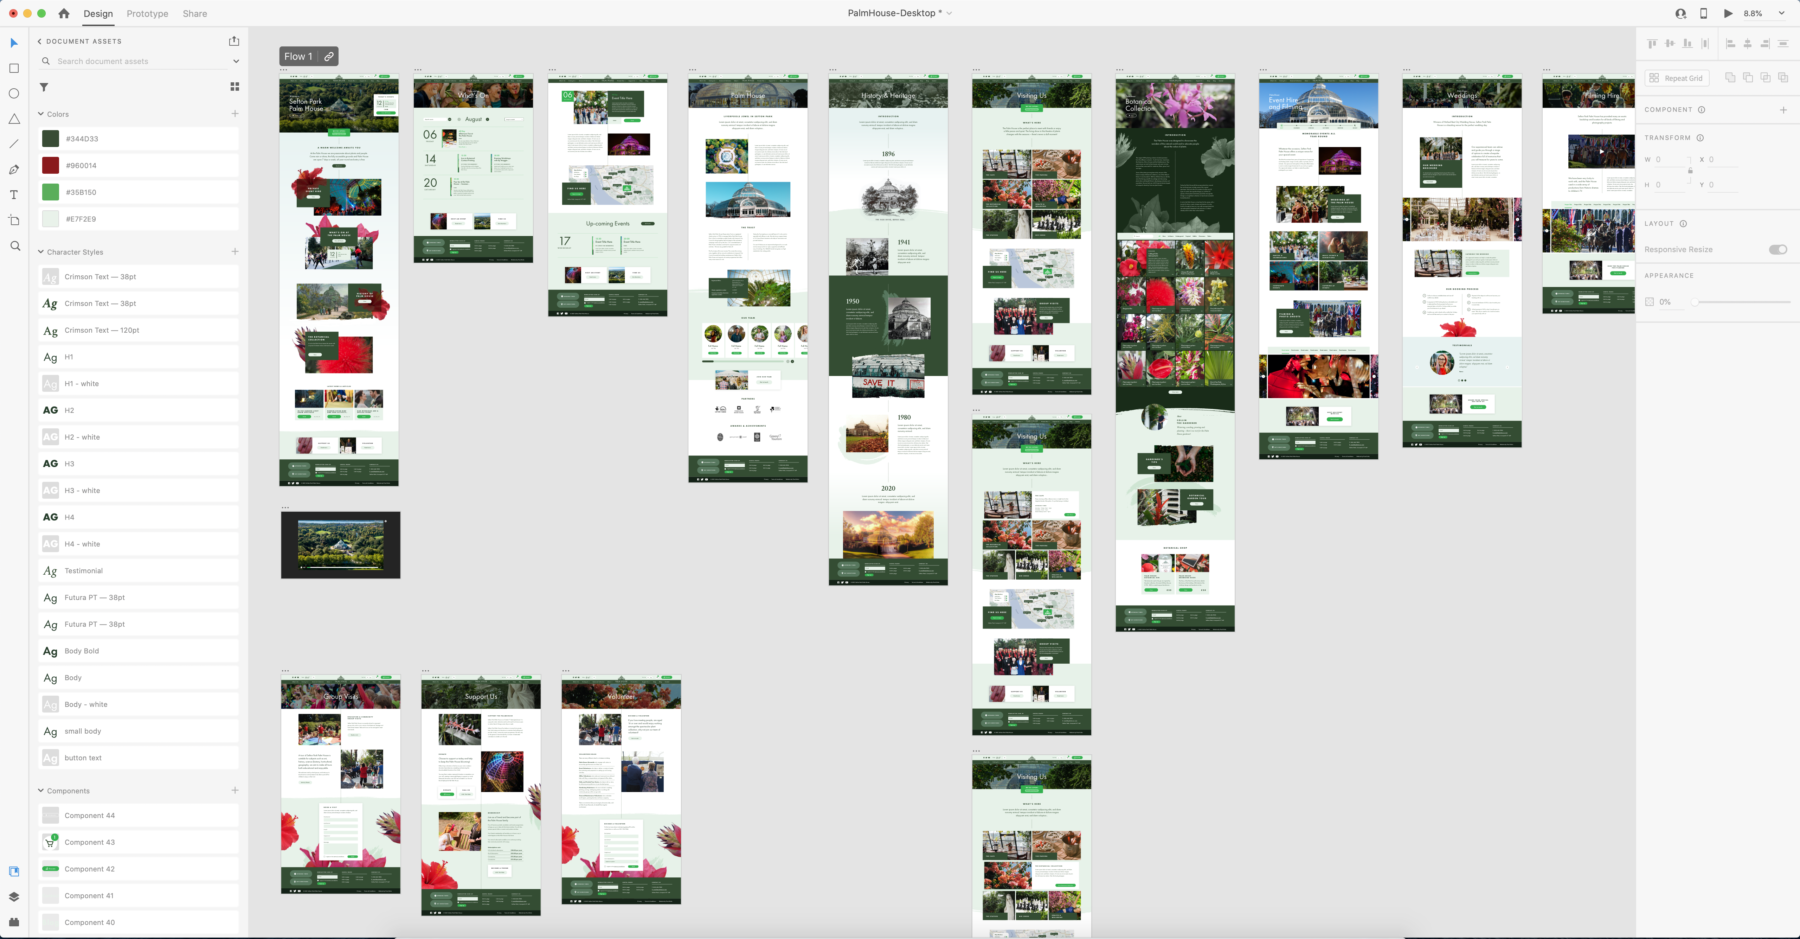 Example of a website prototype for Sefton Park Palm House - in Adobe XD